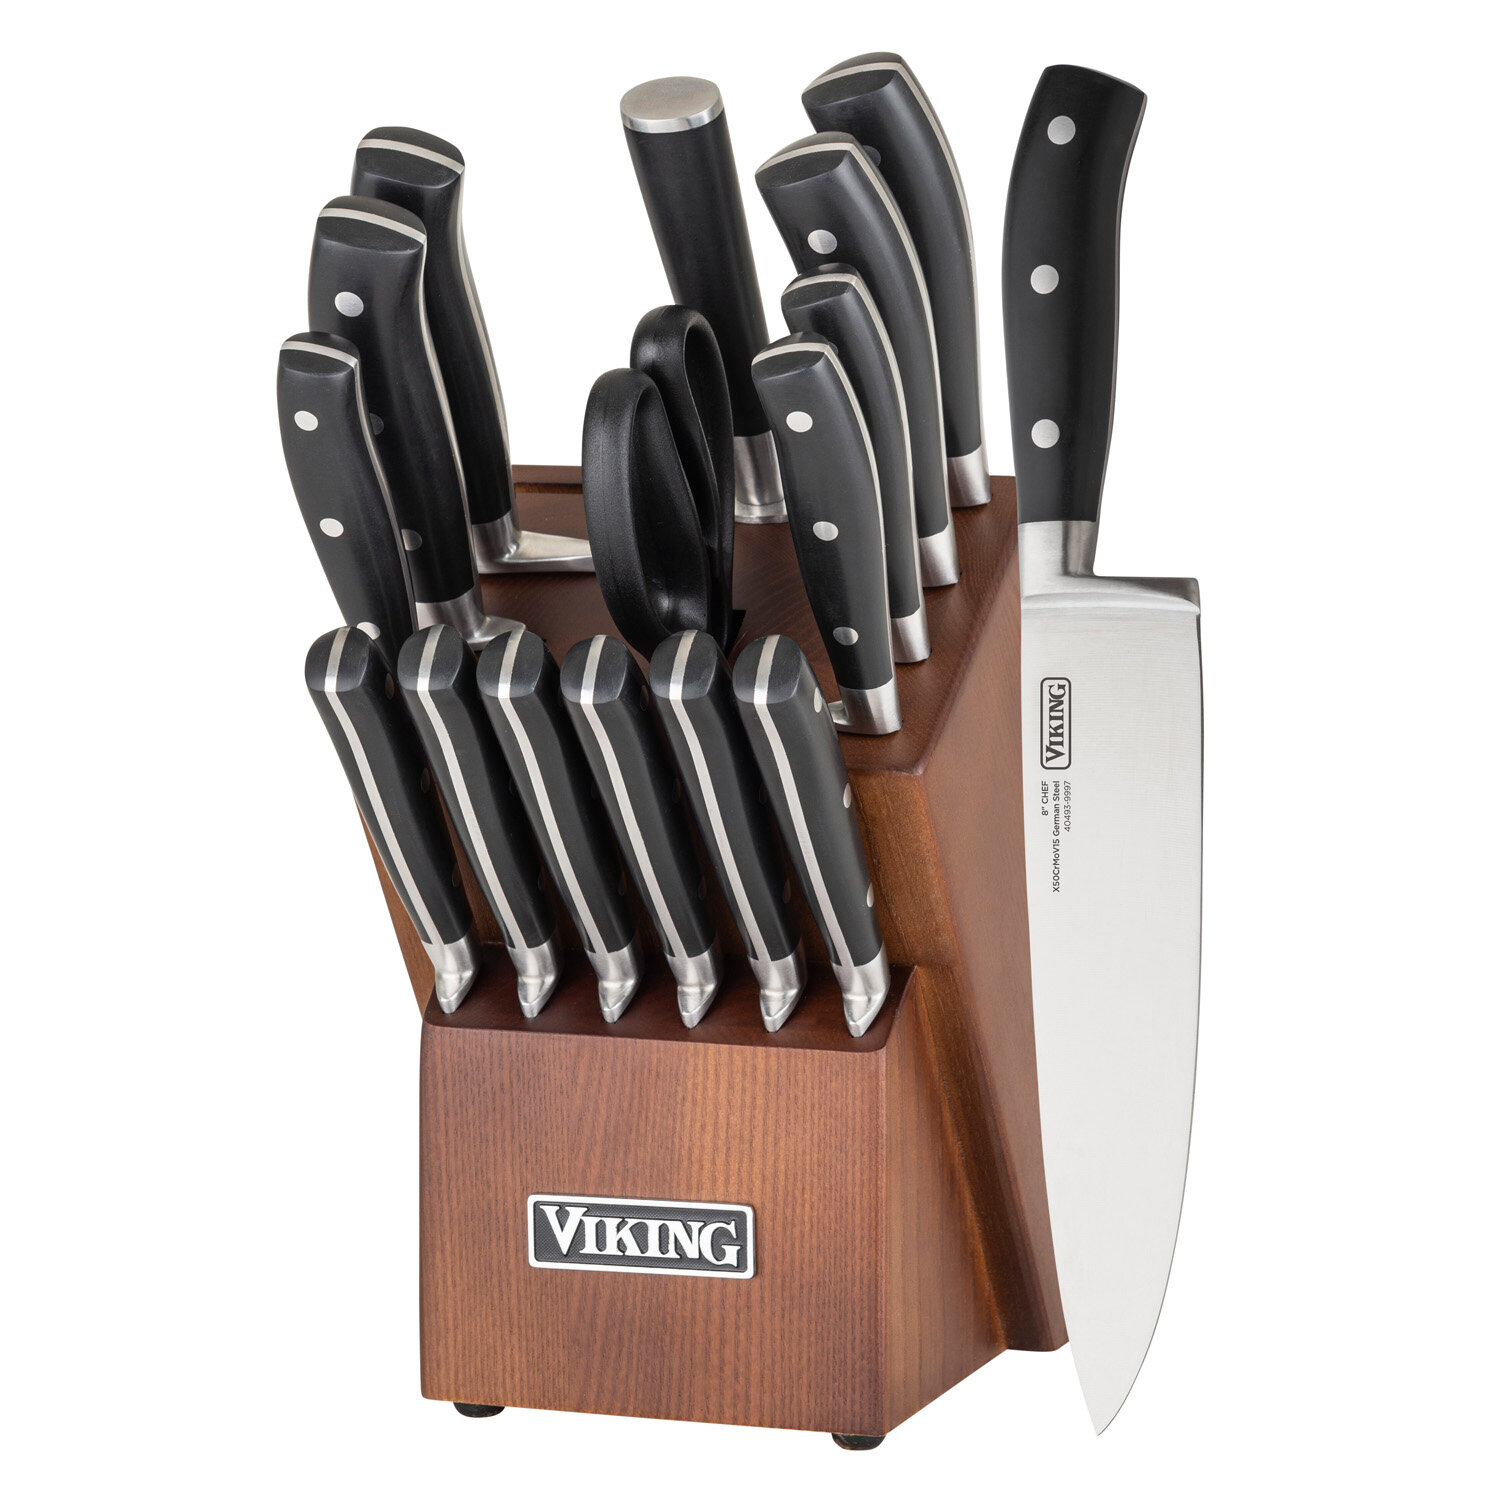 Styled Settings Copper Stainless Steel Knife Set with Walnut Knife Block